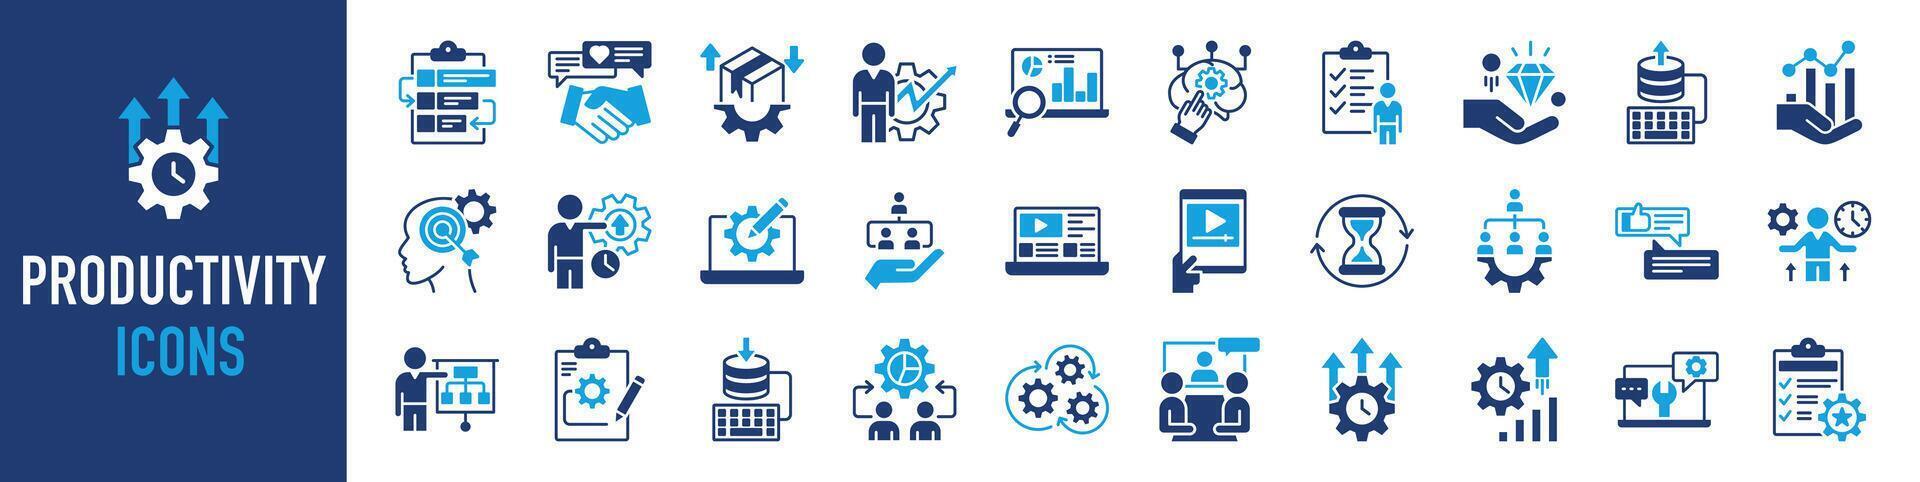 Productivity icon set. Such as efficiency, task, focus, multitasking, performance, process, workflow, growth, deal, routine, project management, data analysis, and productive. Vector icons collection.